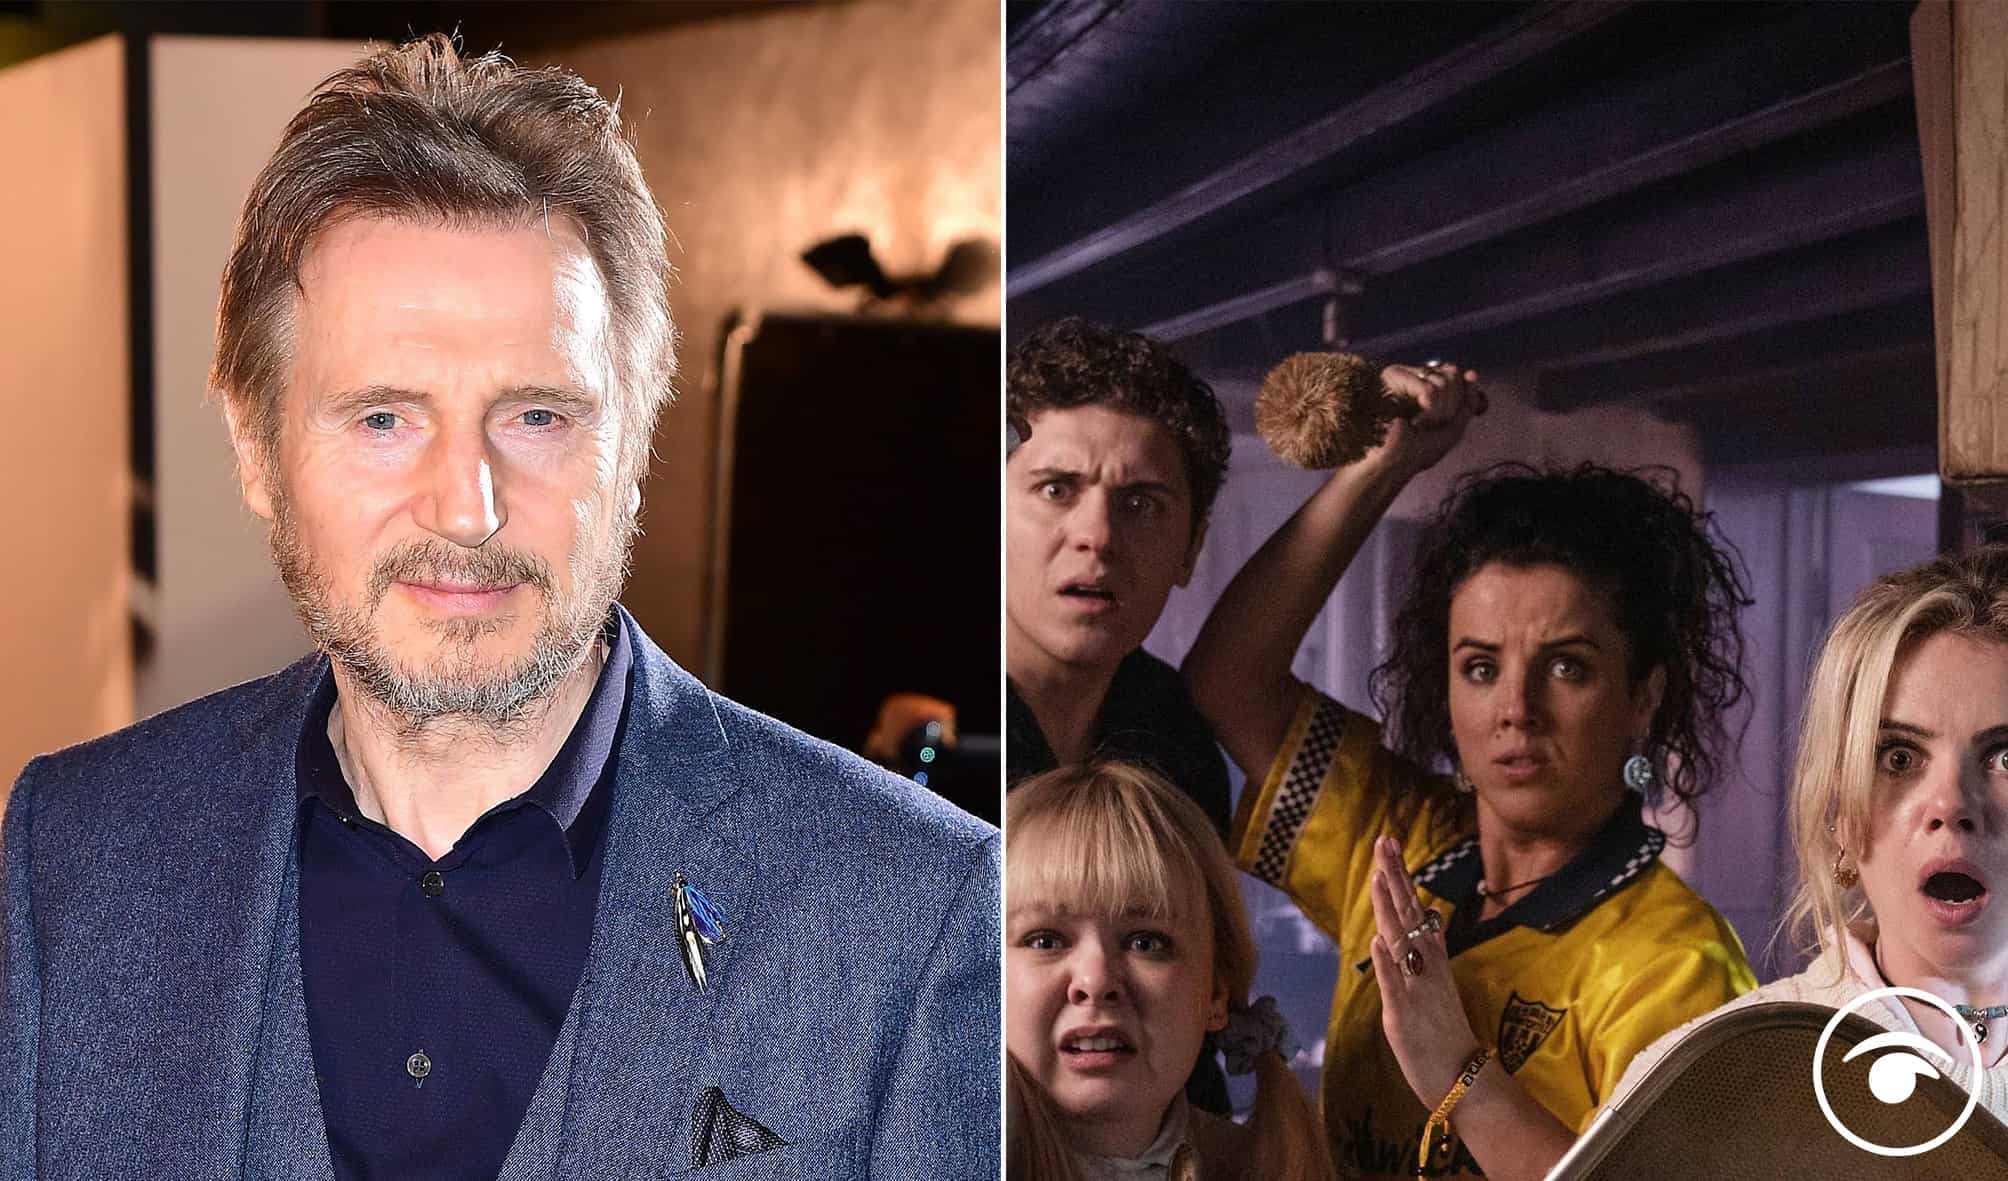 Good Friday agreement: People moved by Liam Neeson’s cameo in final episode of Derry Girls